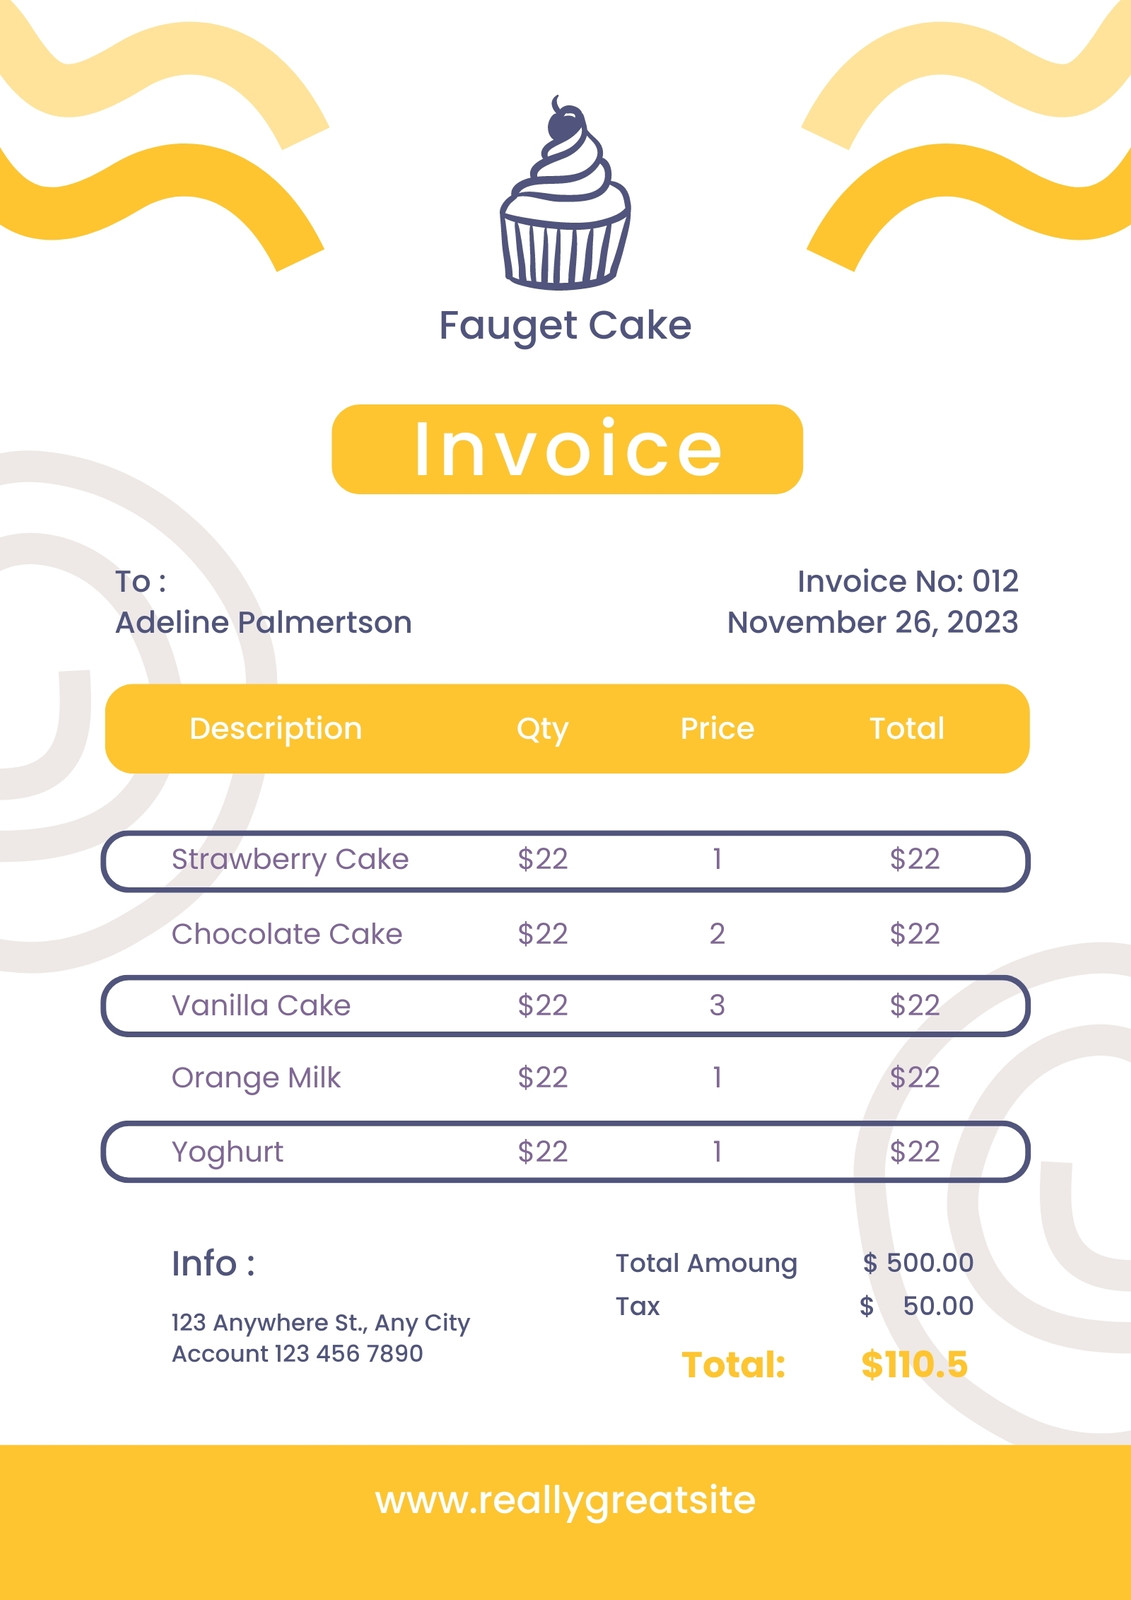 7+ Free Cake Invoice Templates for Bakery Business - Template Sumo | Invoice  template, Bakery business, Cake